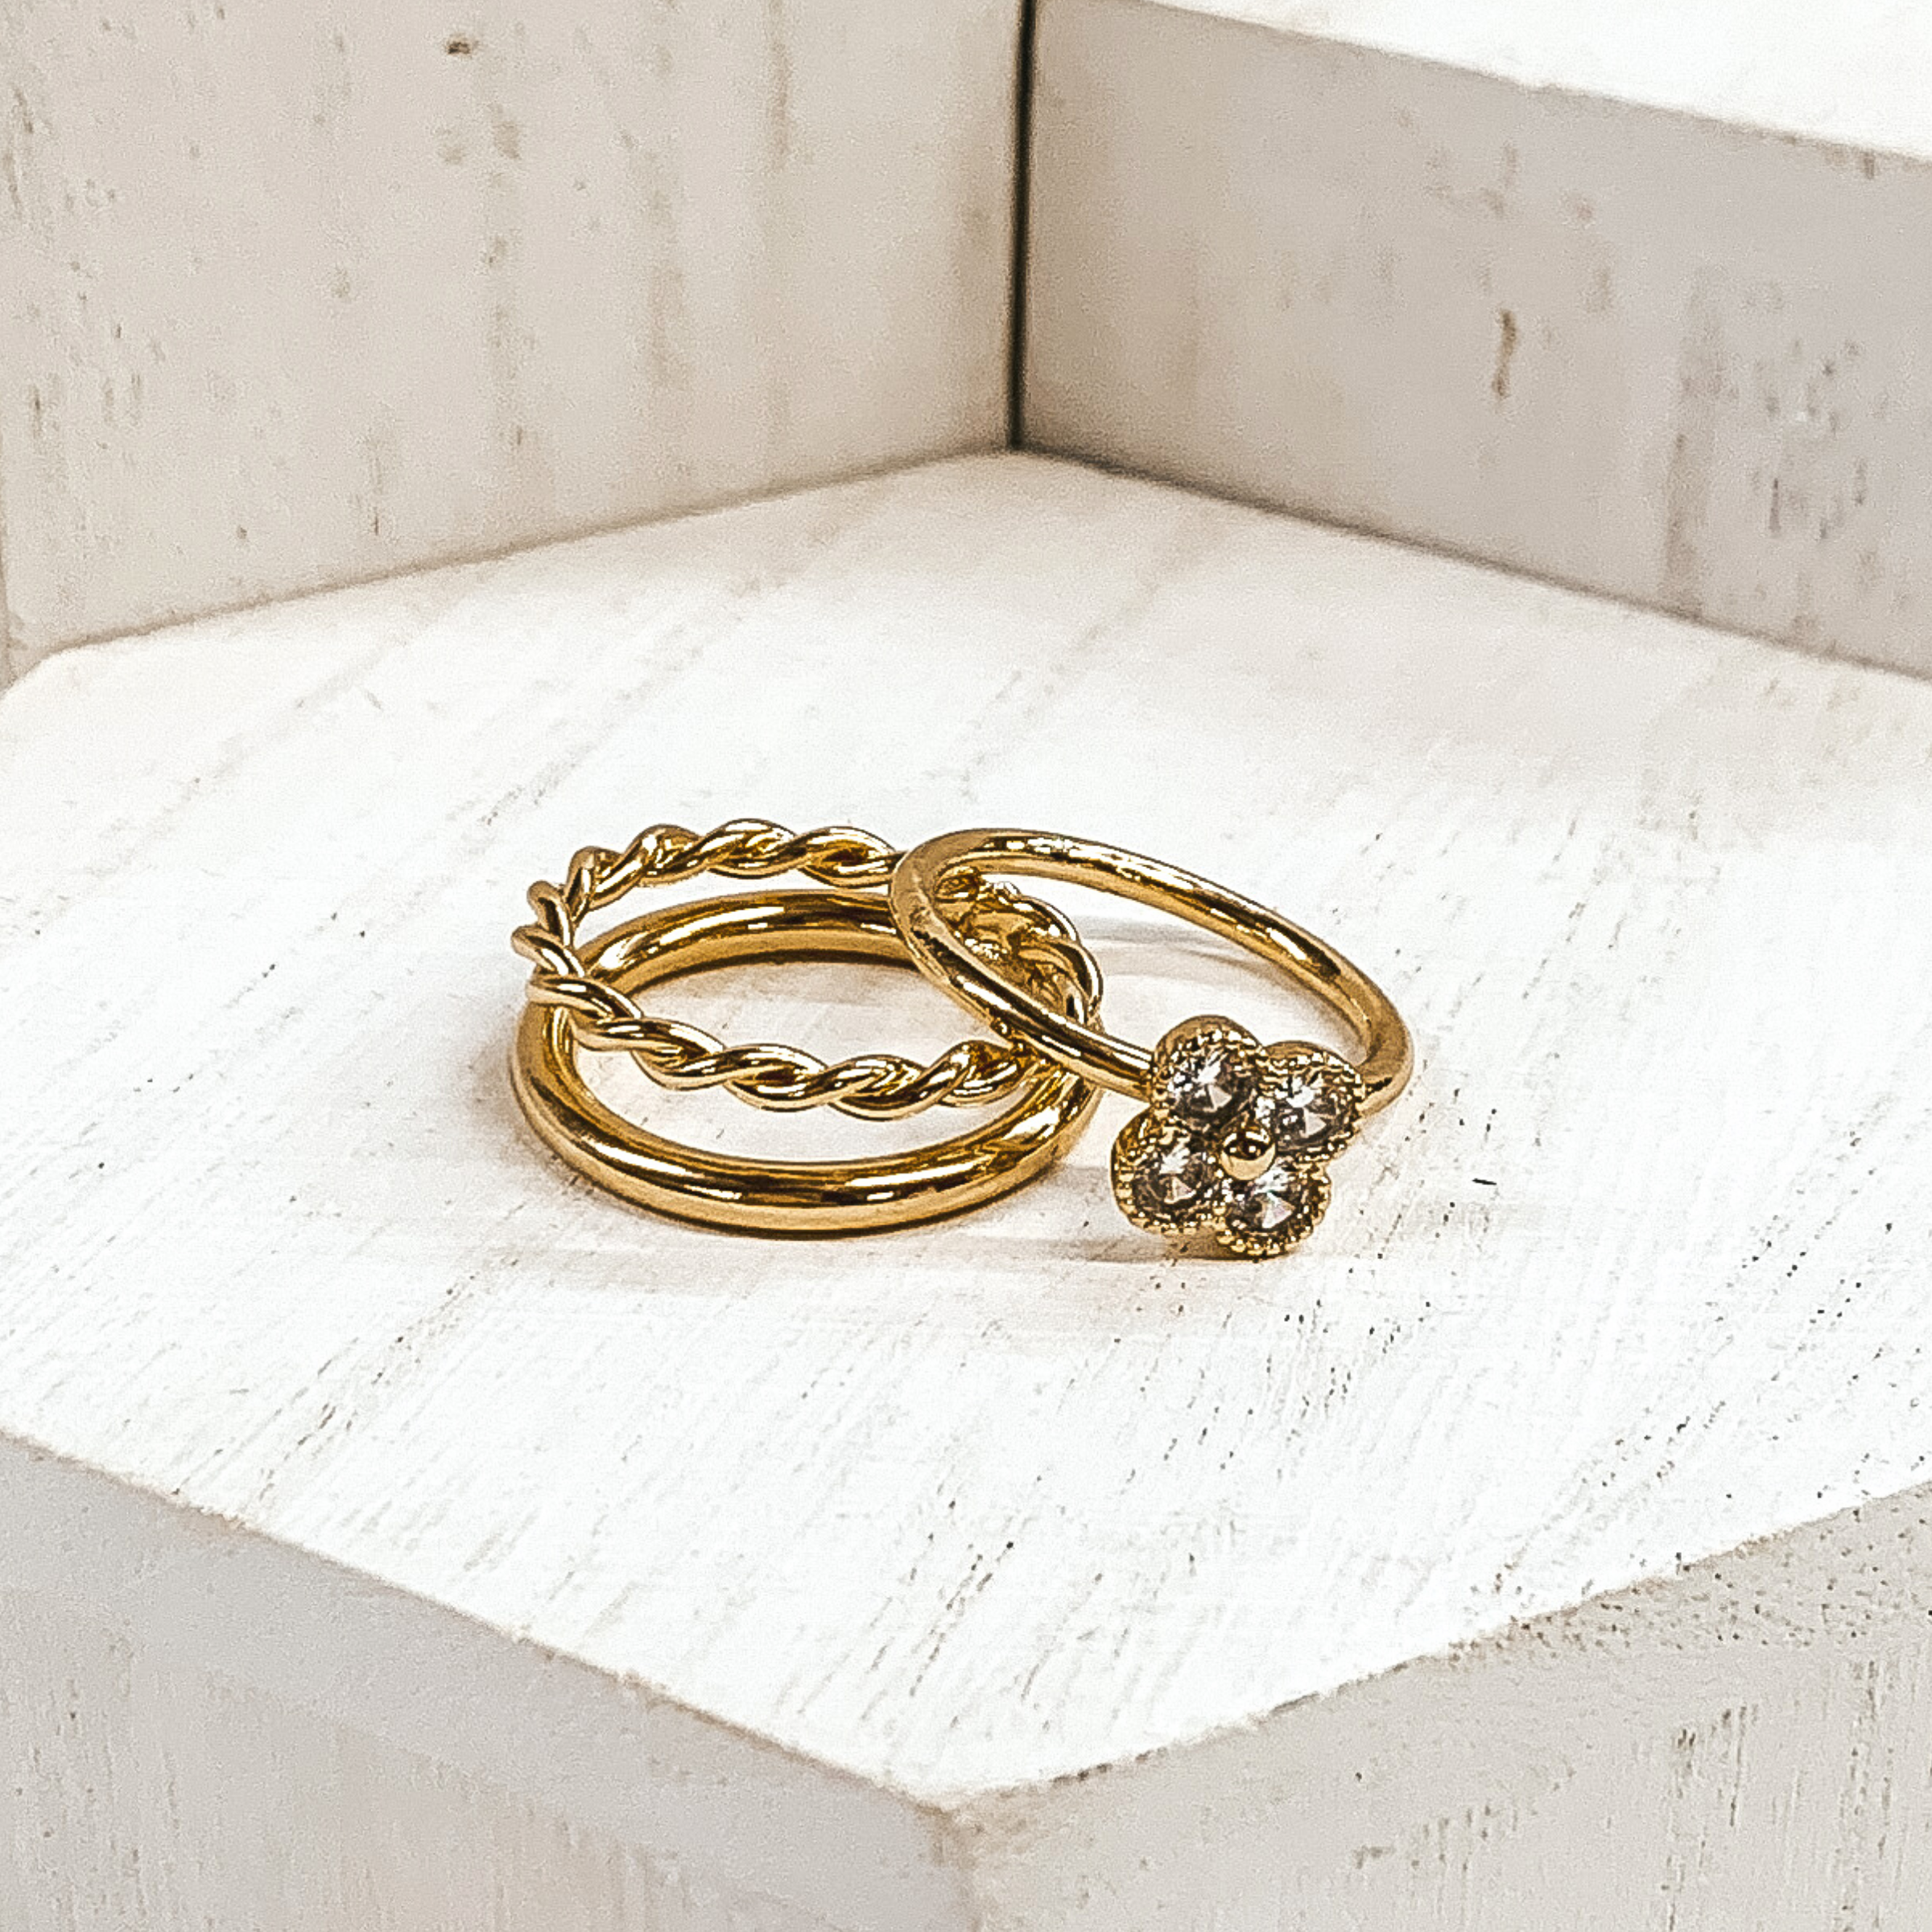 One ring is a gold, double stacked ring with a plain band and twisted band. The second rings is a plain band with a clover pendant that has clear crystals. These rings are pictured on white blocks. 